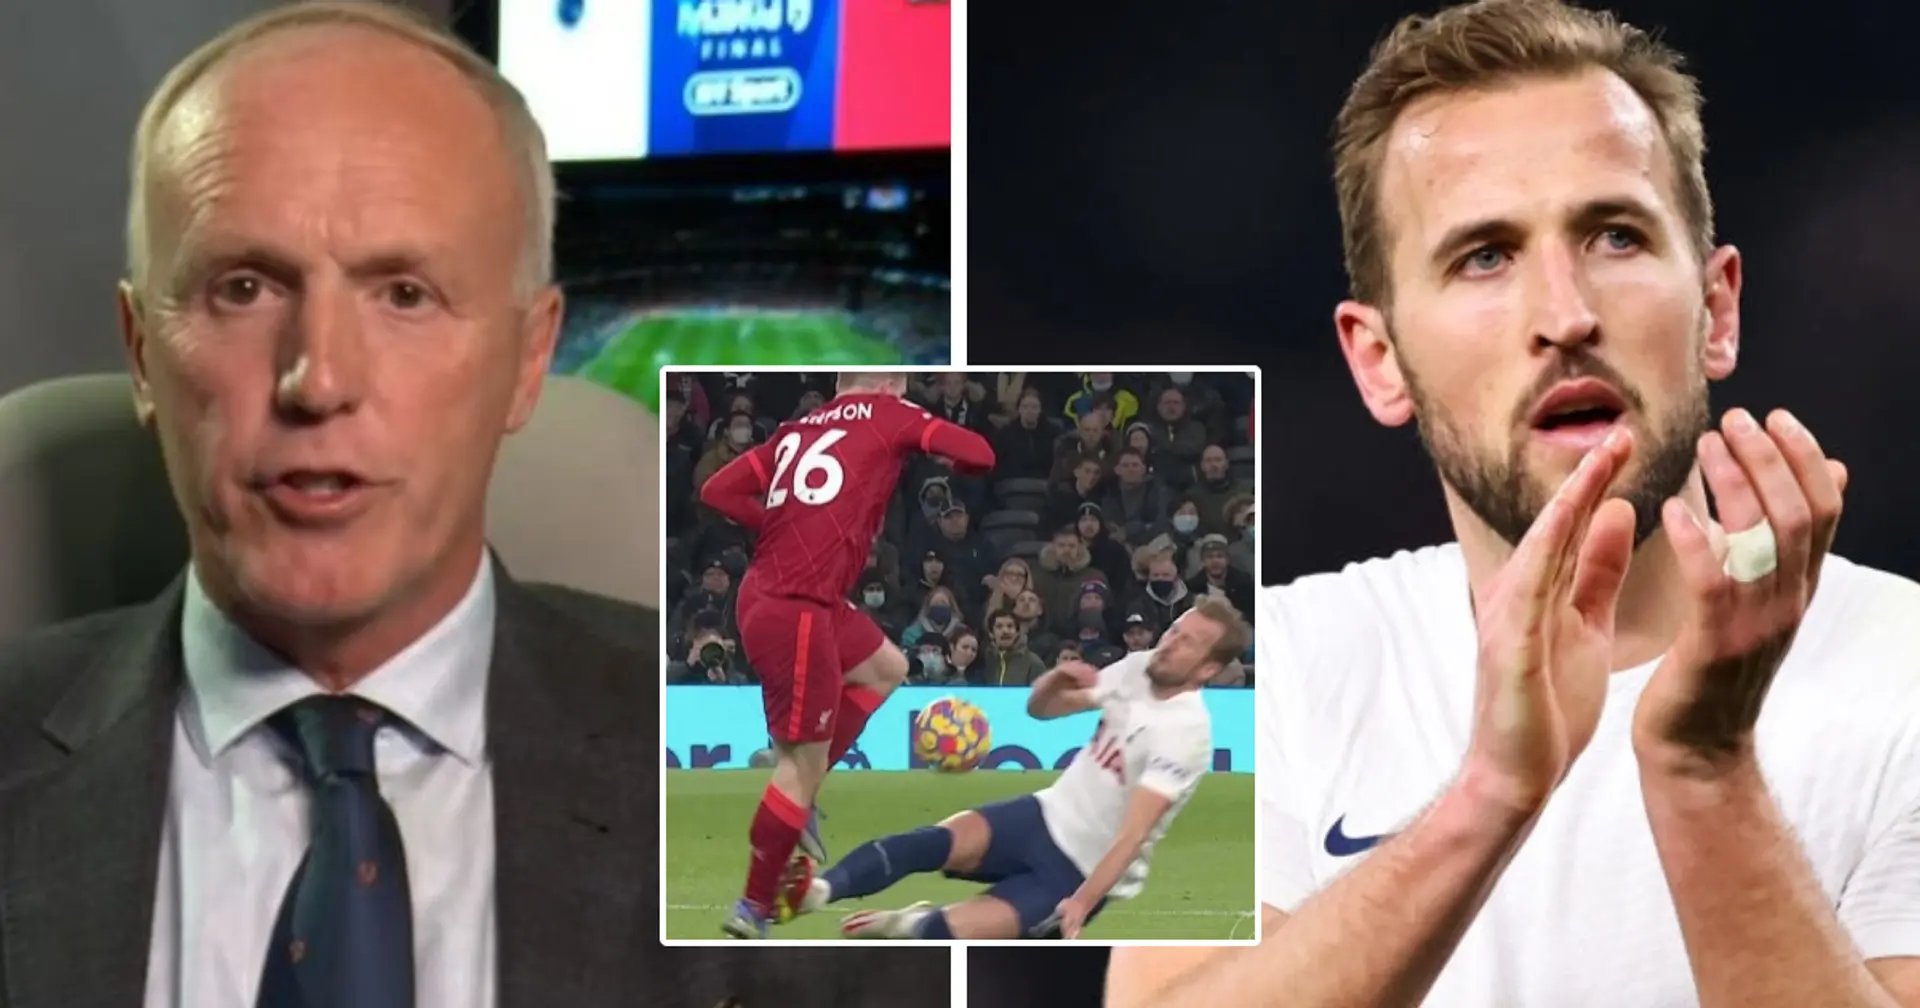 'He is not in that category of player': Ex-PL ref Peter Walton's bizarre explanation for why Kane wasn't sent off